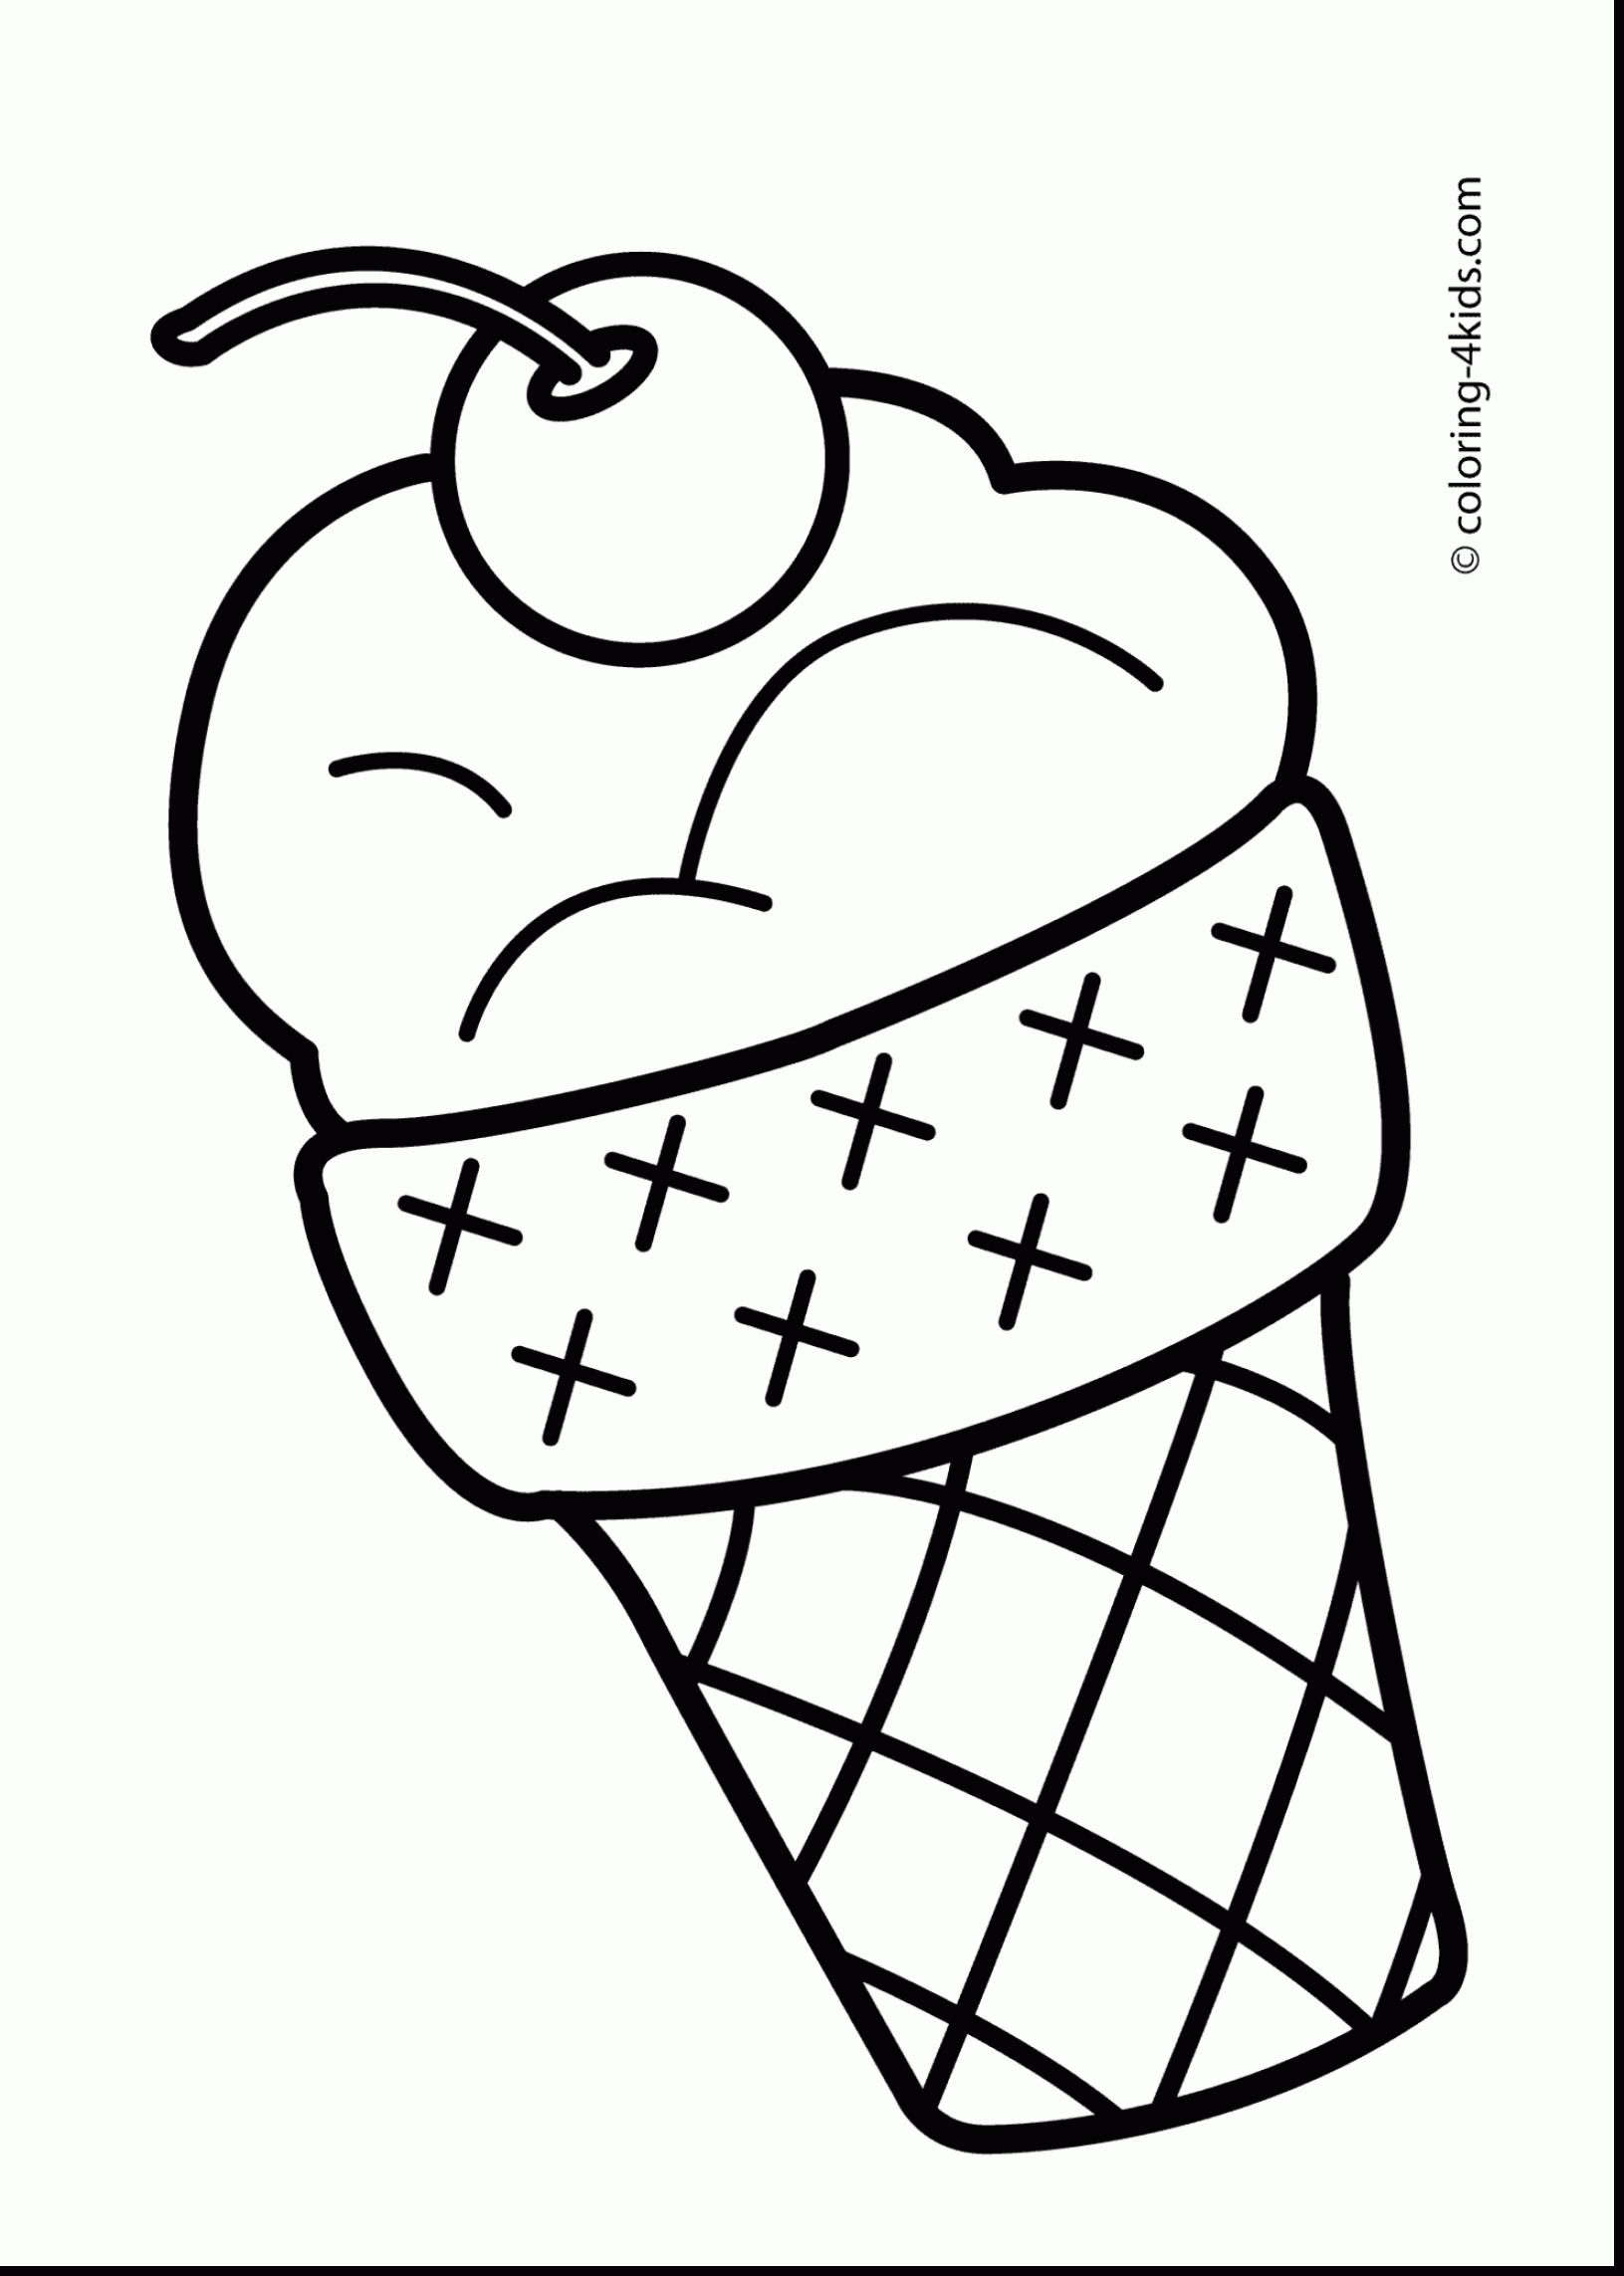 Coloring Pages : Coloring Pages Color Sheets Ruaya My Dream Co Free - Free Printable Color Sheets For Preschool